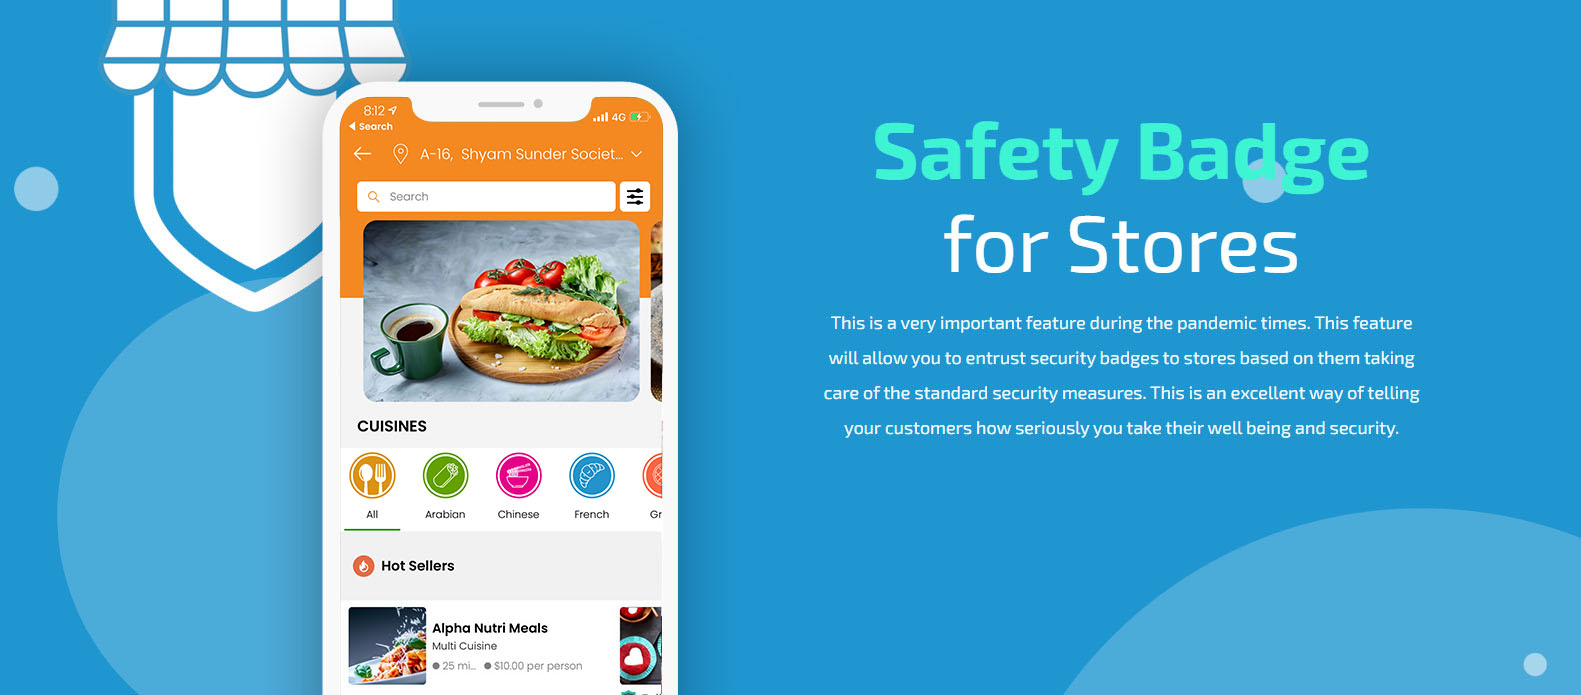 deliverall - safety badge for stores